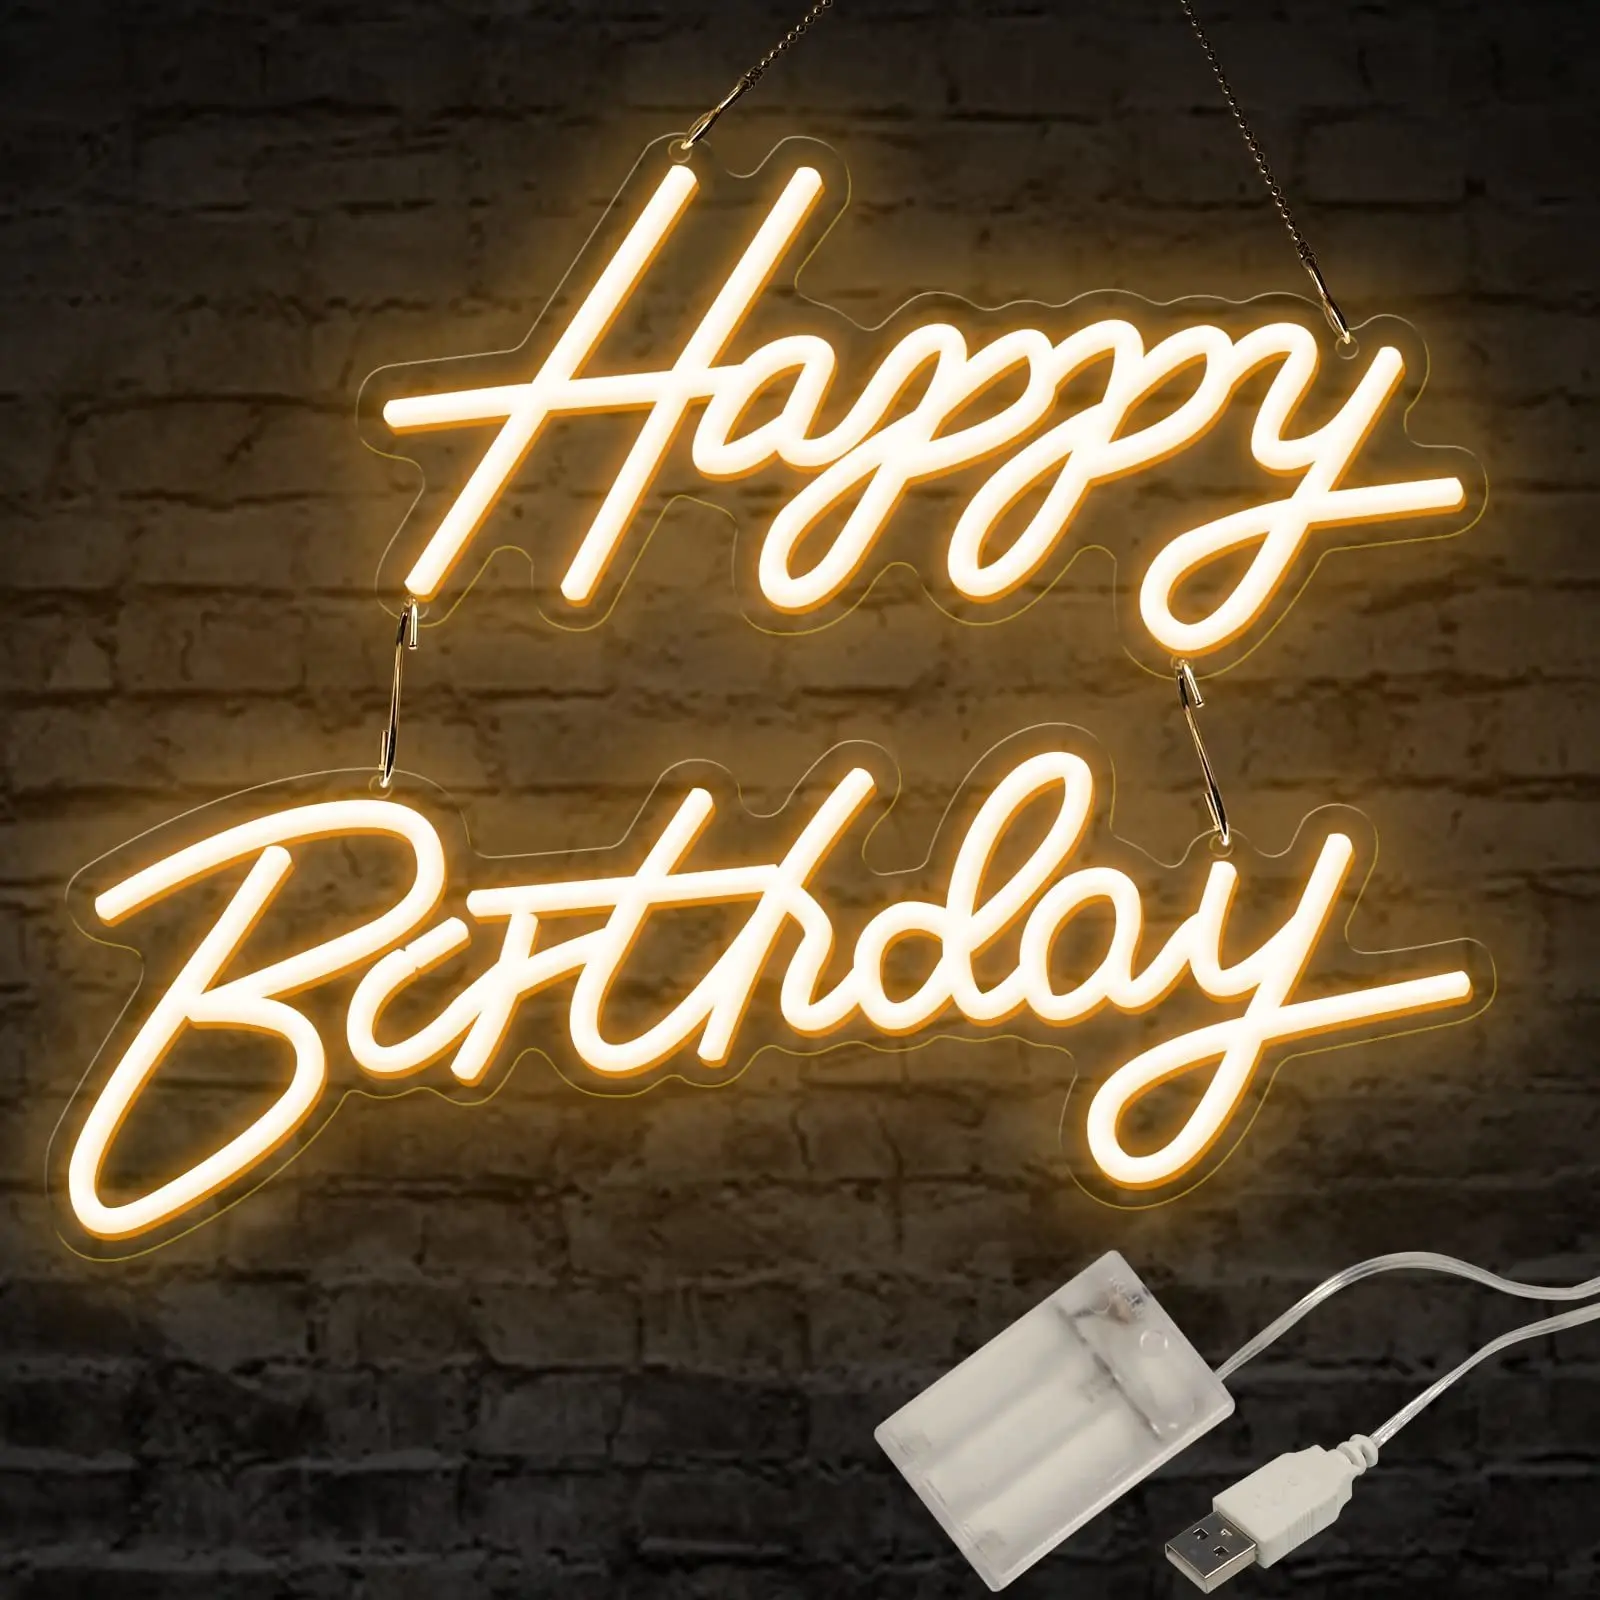 Happy Birthday Led Neon Sign for Wall Deco Battery or USB